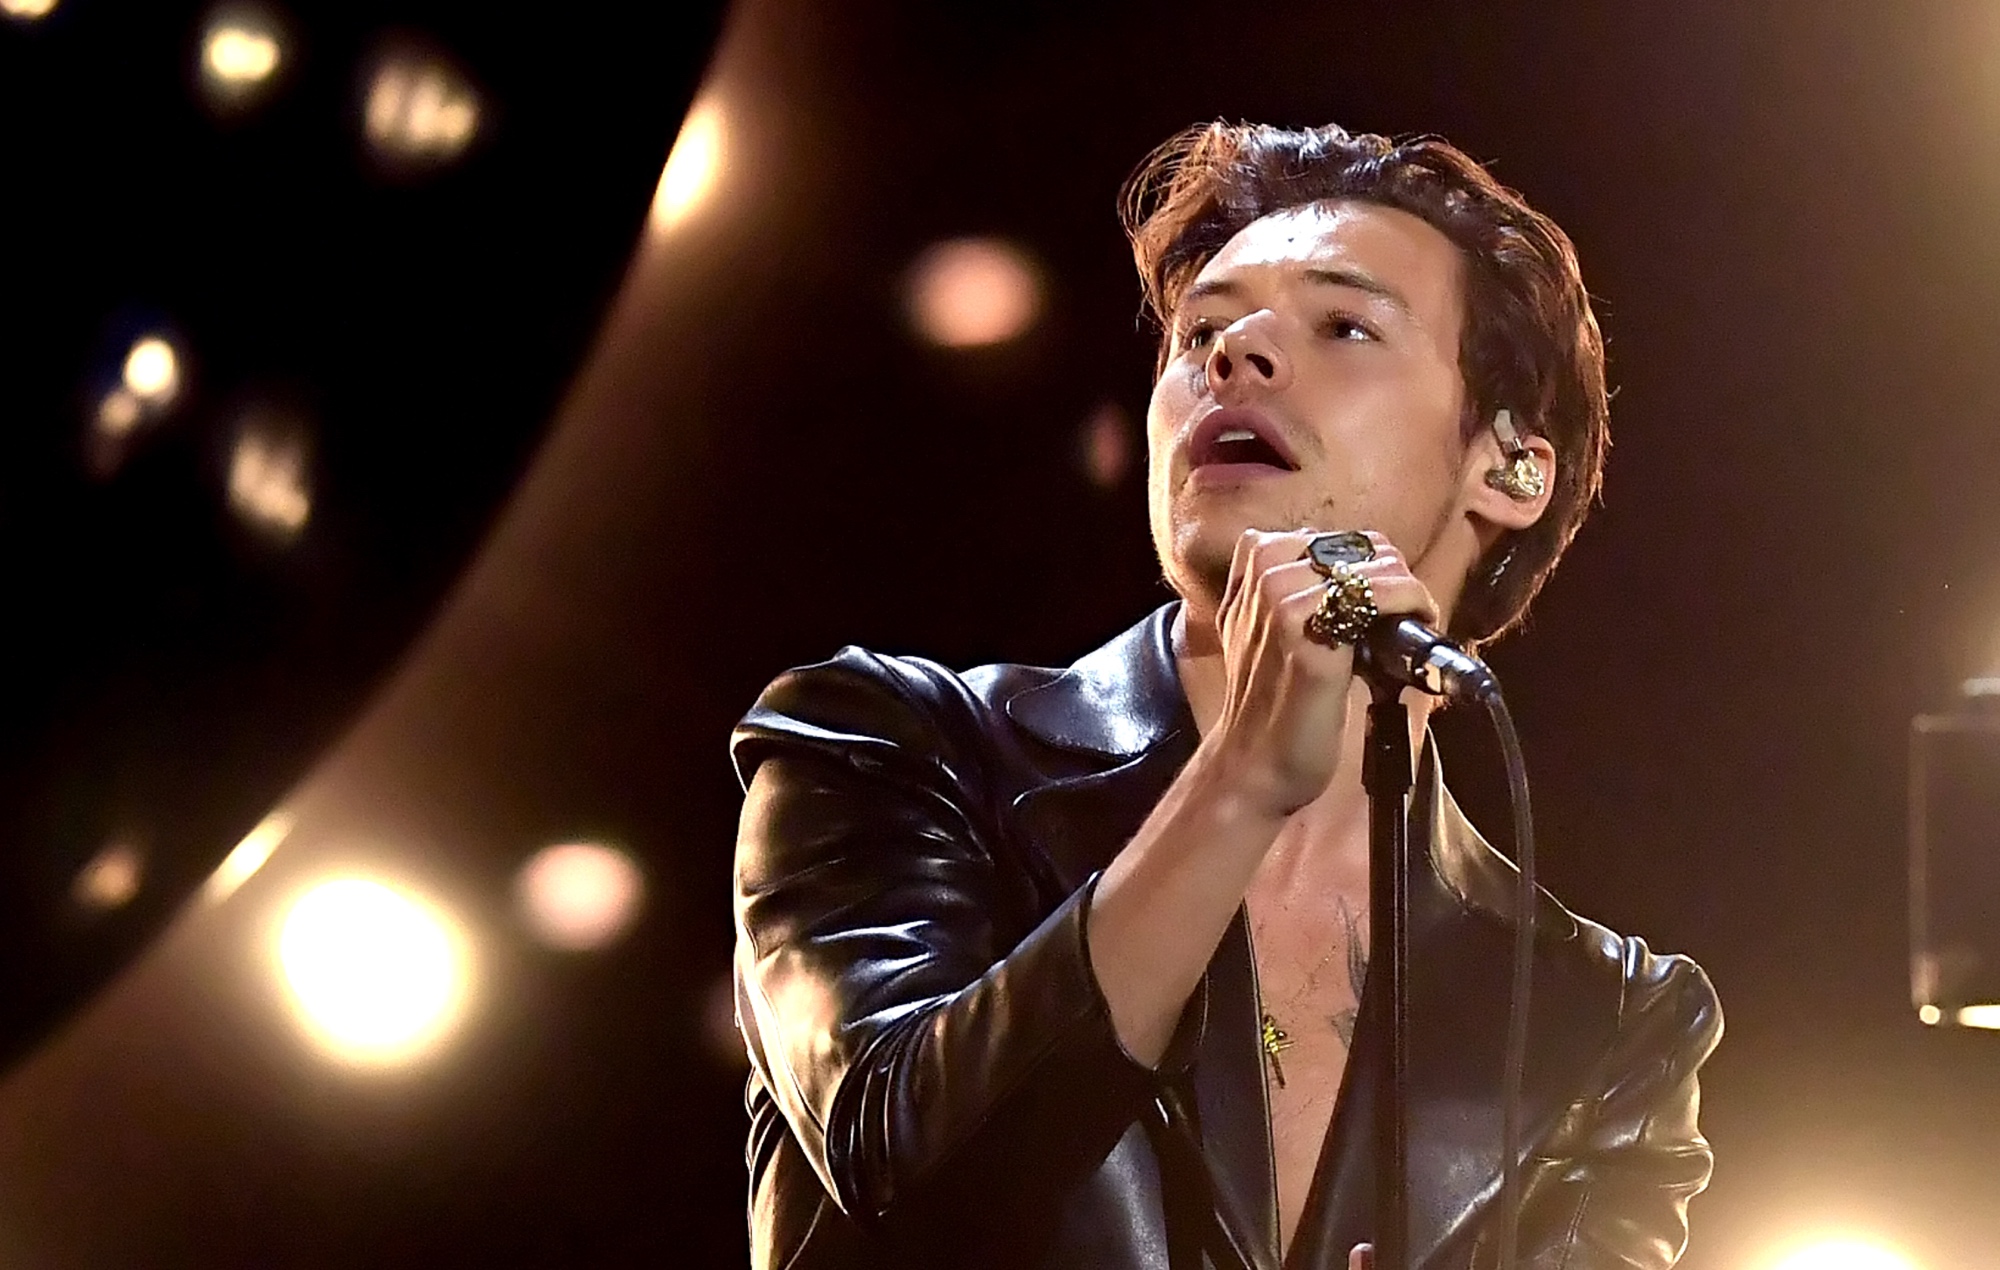 Watch footage of Harry Styles kicking off his 'Love On Tour' dates in Las Vegas